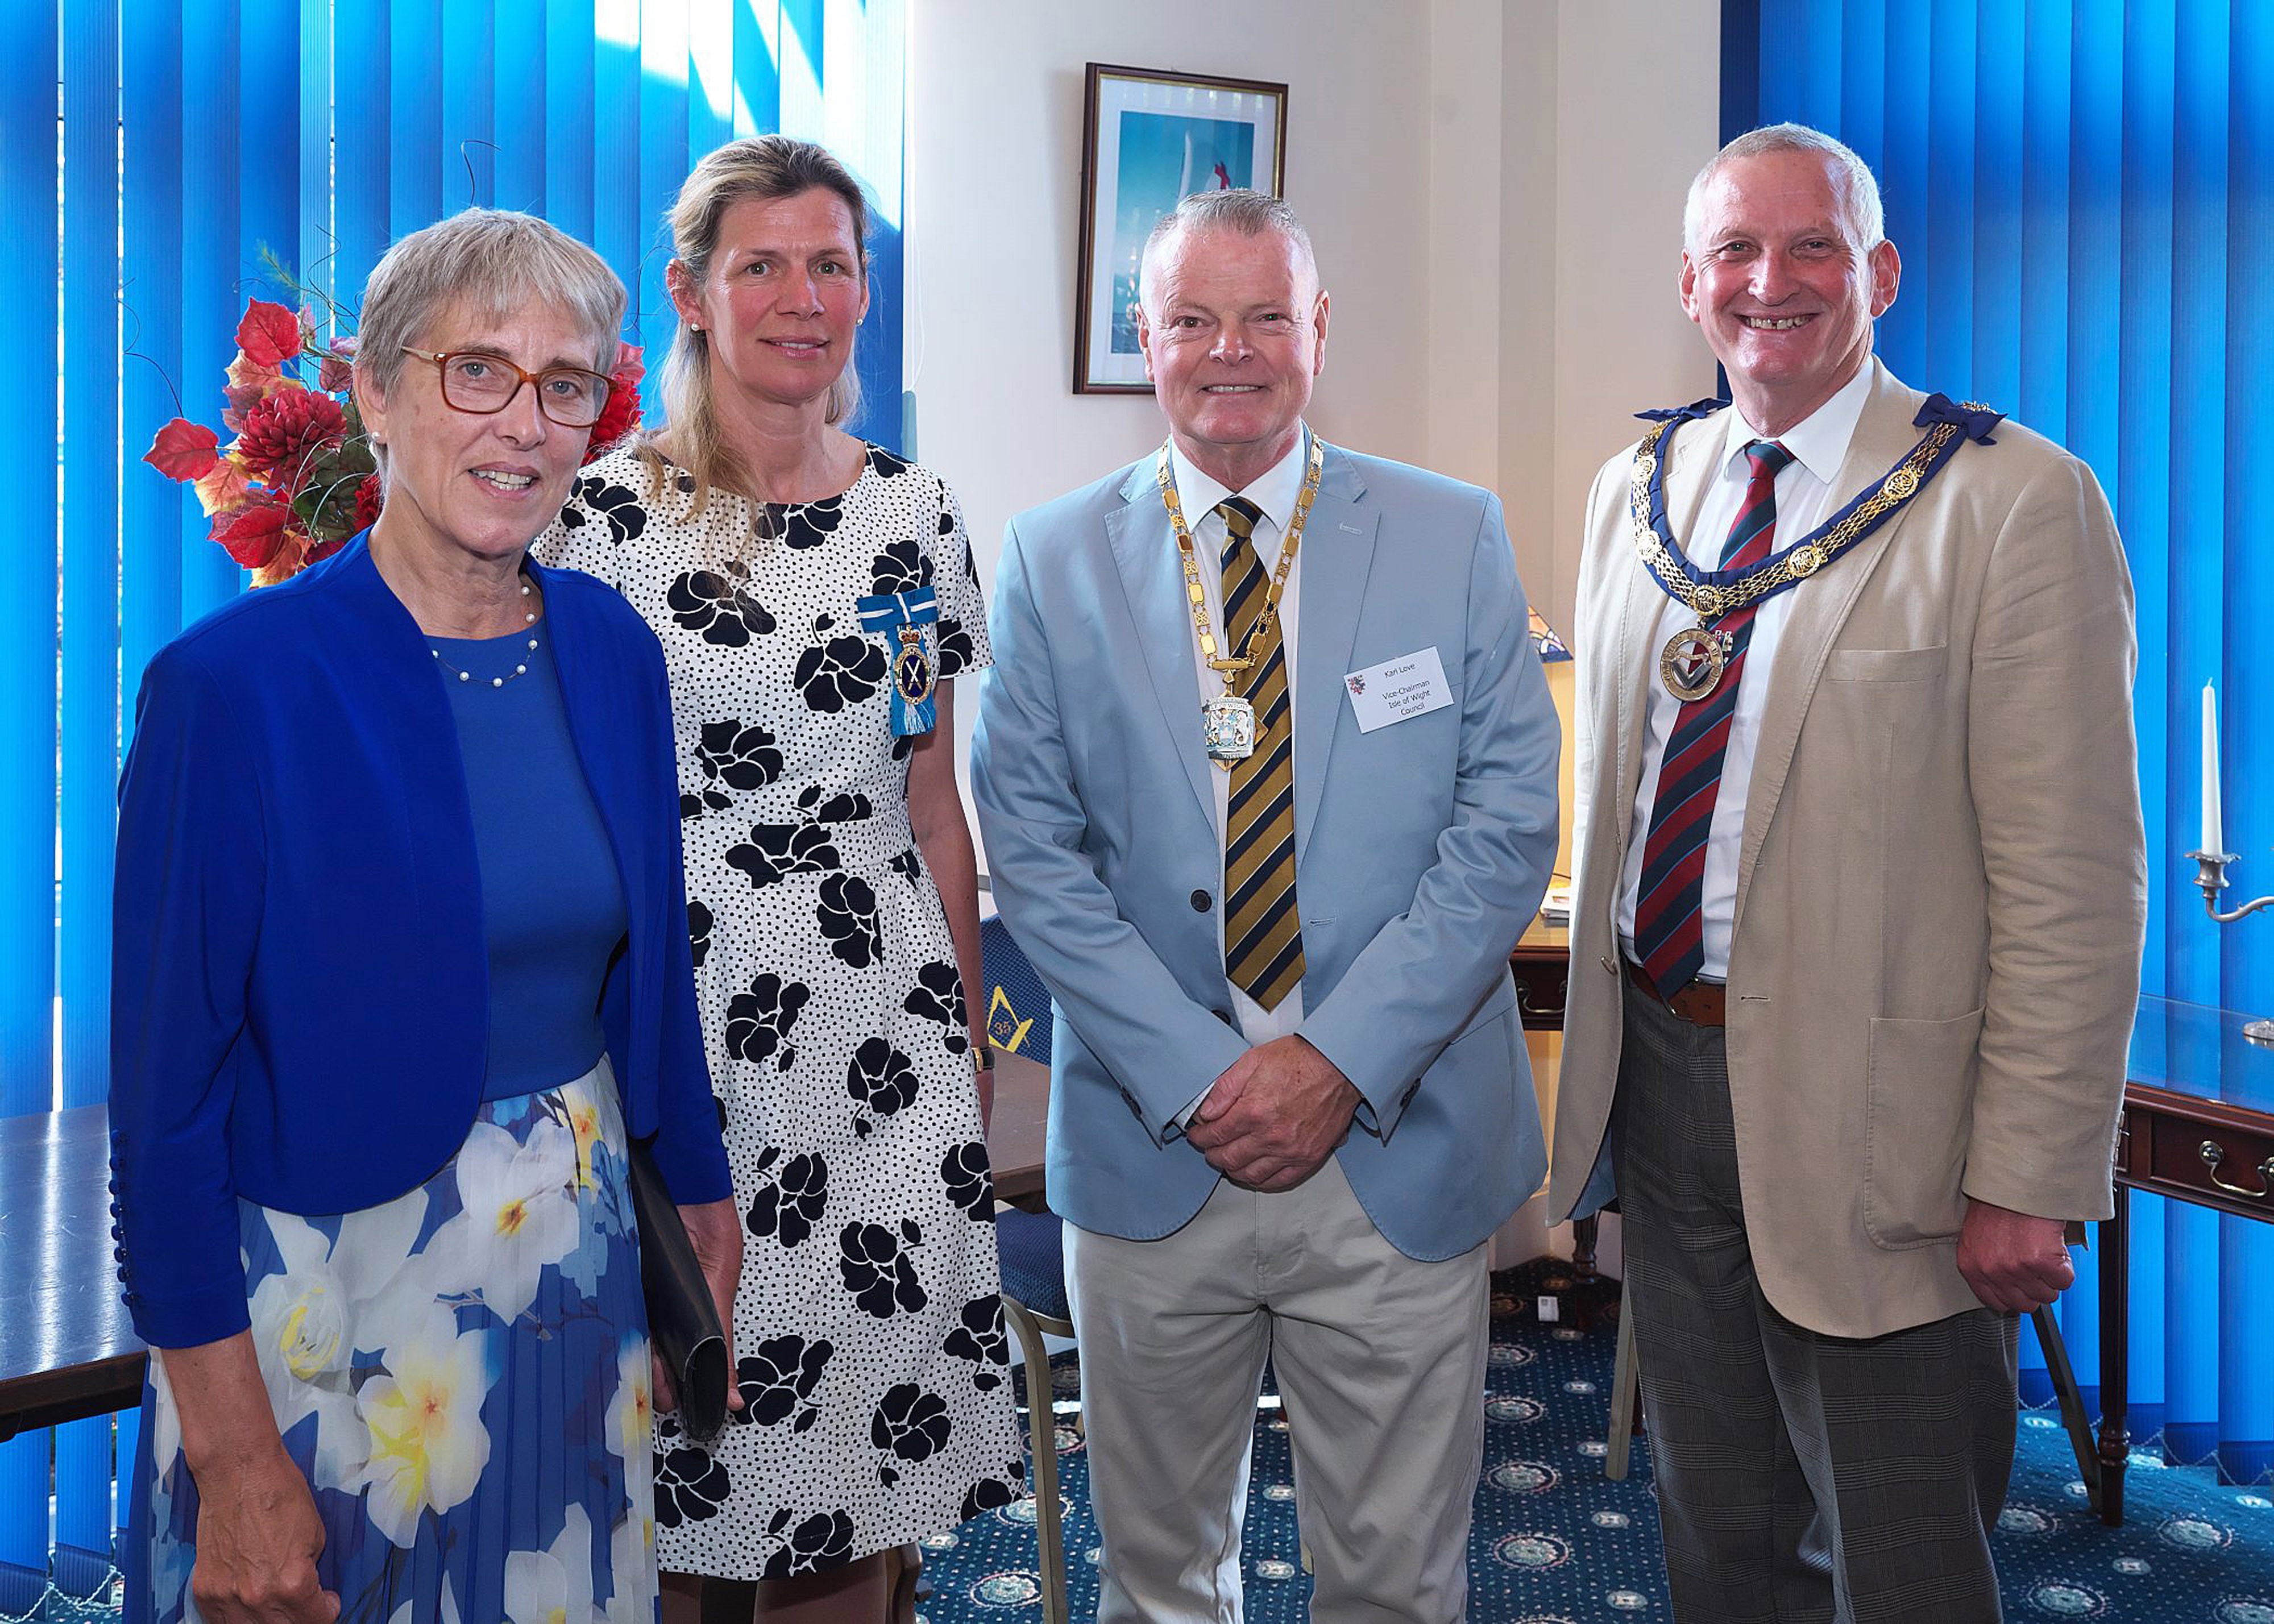 Isle of Wight Freemason Adrian Cleightonhills meets HM Lord Lieutenant of the Isle of Wight, Mrs Susie Sheldon, High Sheriff of the Isle of Wight, Mrs Dawn Haig-Thomas, Vice Chairman Isle of Wight Council, Mr Karl Love